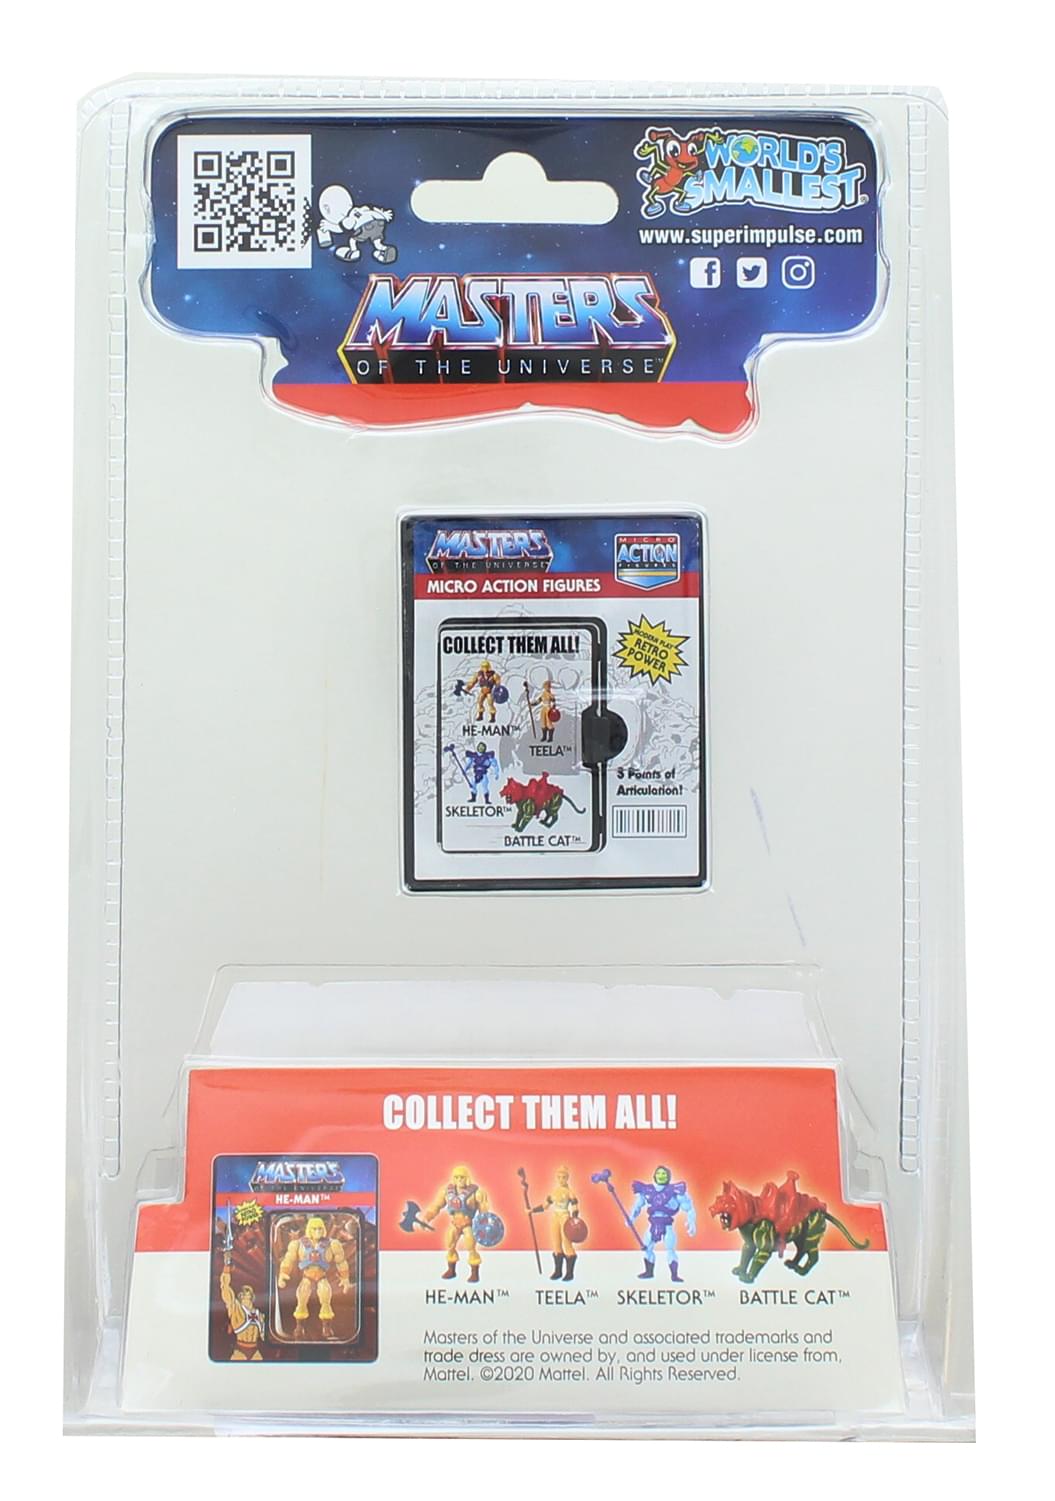 Masters of the Universe World's Smallest Microa Action Figure | He-Man